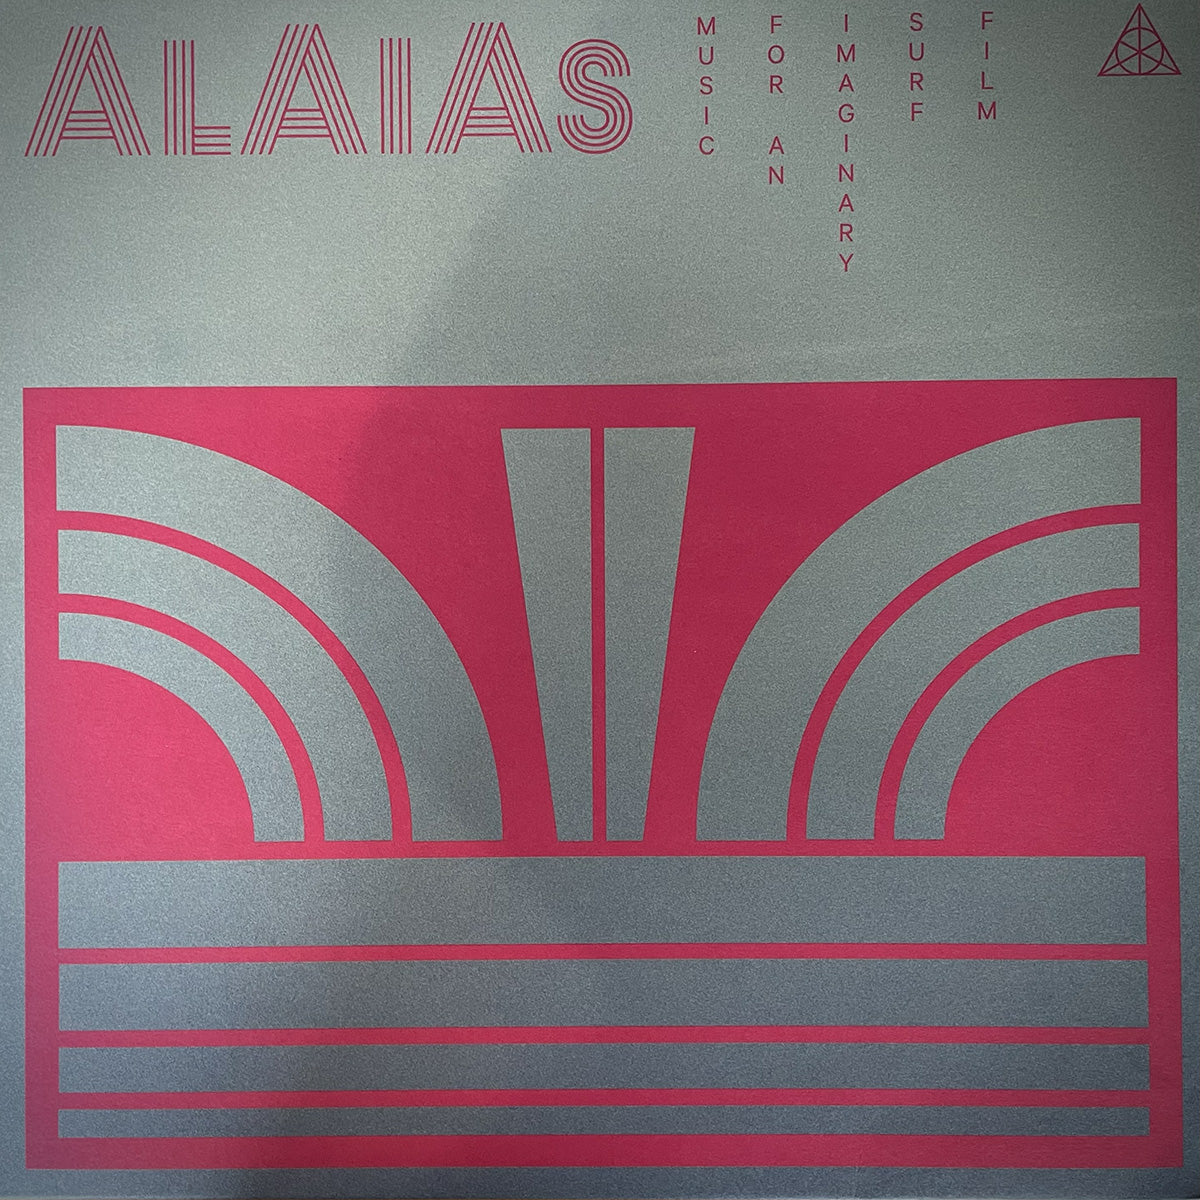 Alaias - Music for an Imaginary Surf Film